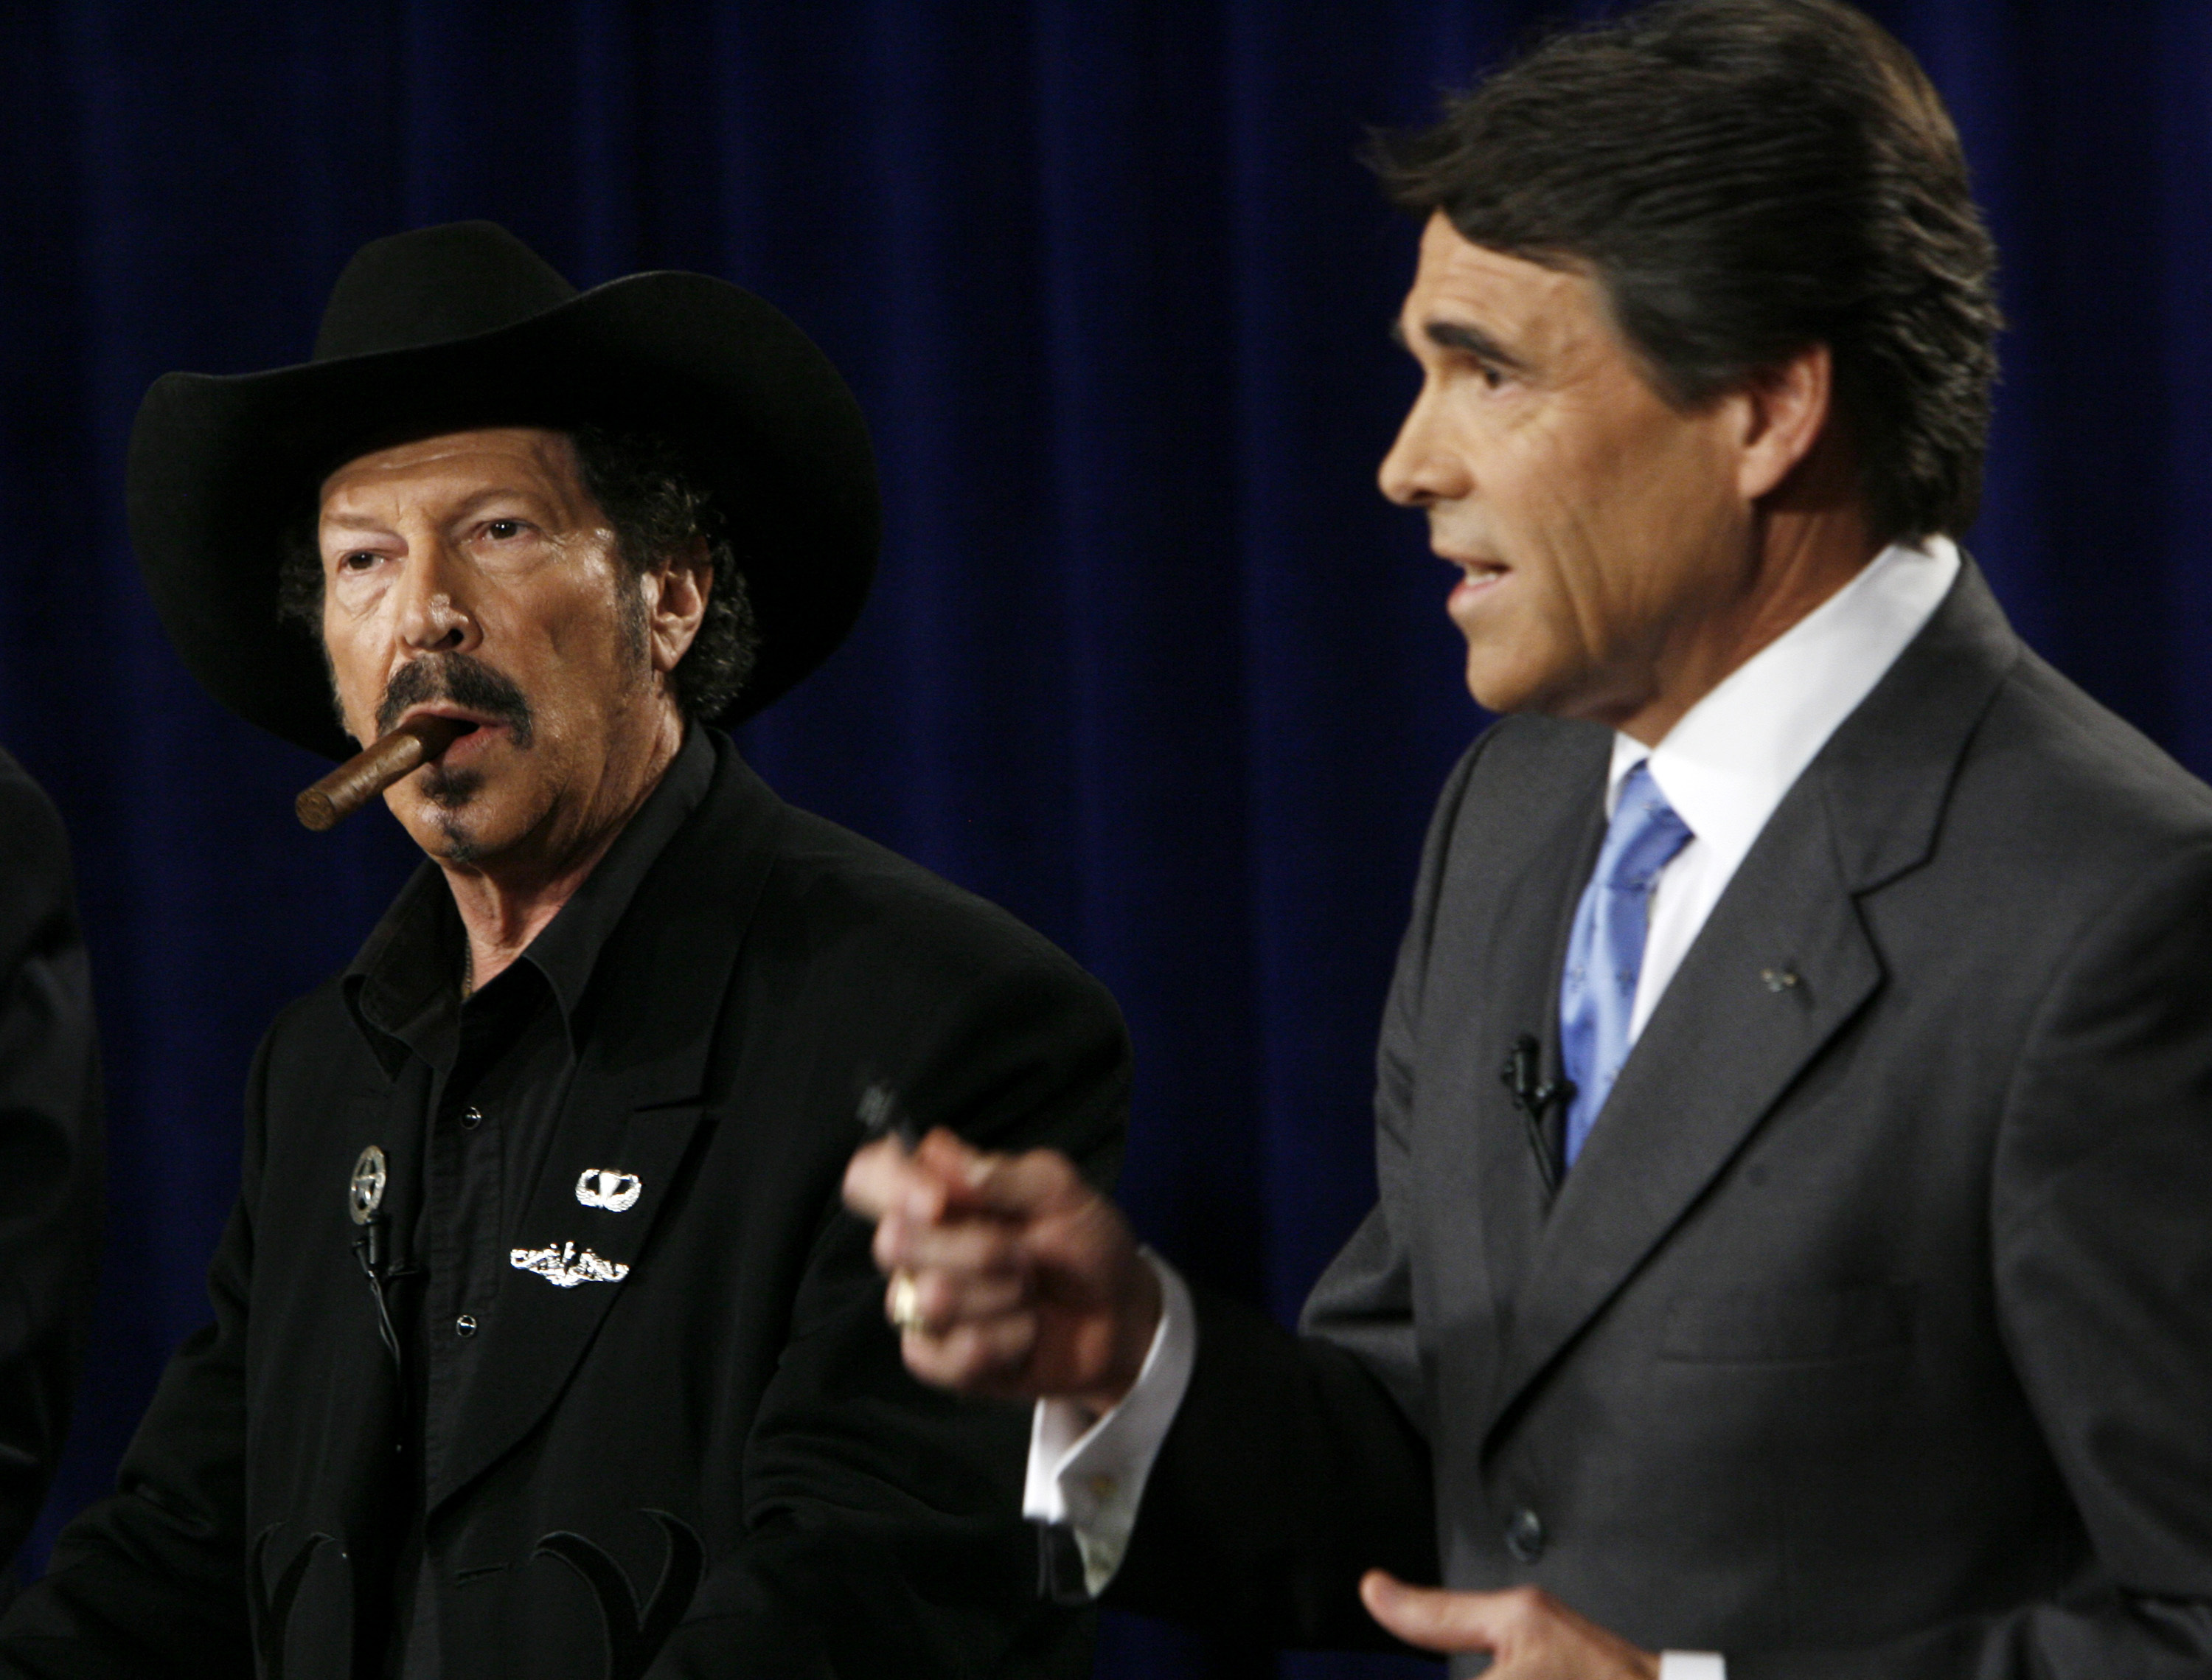 FILE - Texas gubernatorial candidate Kinky Friedman, left, listens as Gov. Rick Perry makes a comment during an on-air debate in Dallas on Oct. 6, 2006. Friedman, the singer, songwriter, satirist and novelist who also dabbled in Texas politics with a campaign for governor, died Thursday at his family’s Texas ranch near San Antonio. He was 79. (AP Photo/Smiley N. Pool, File)